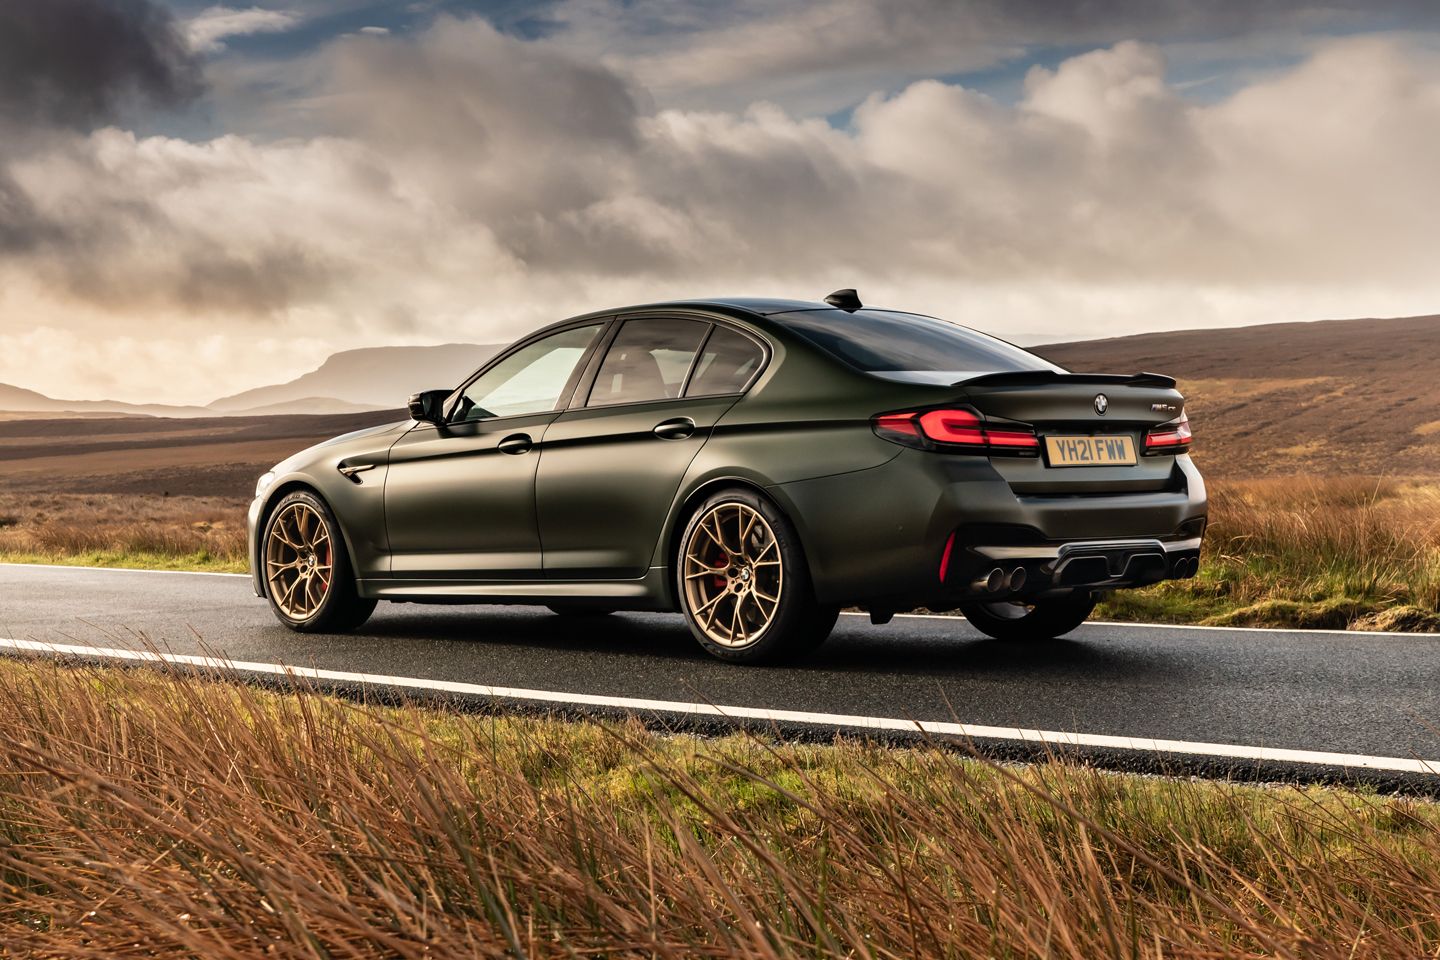 Meet The New BMW M5 Special Edition: The Fastest M Model Yet